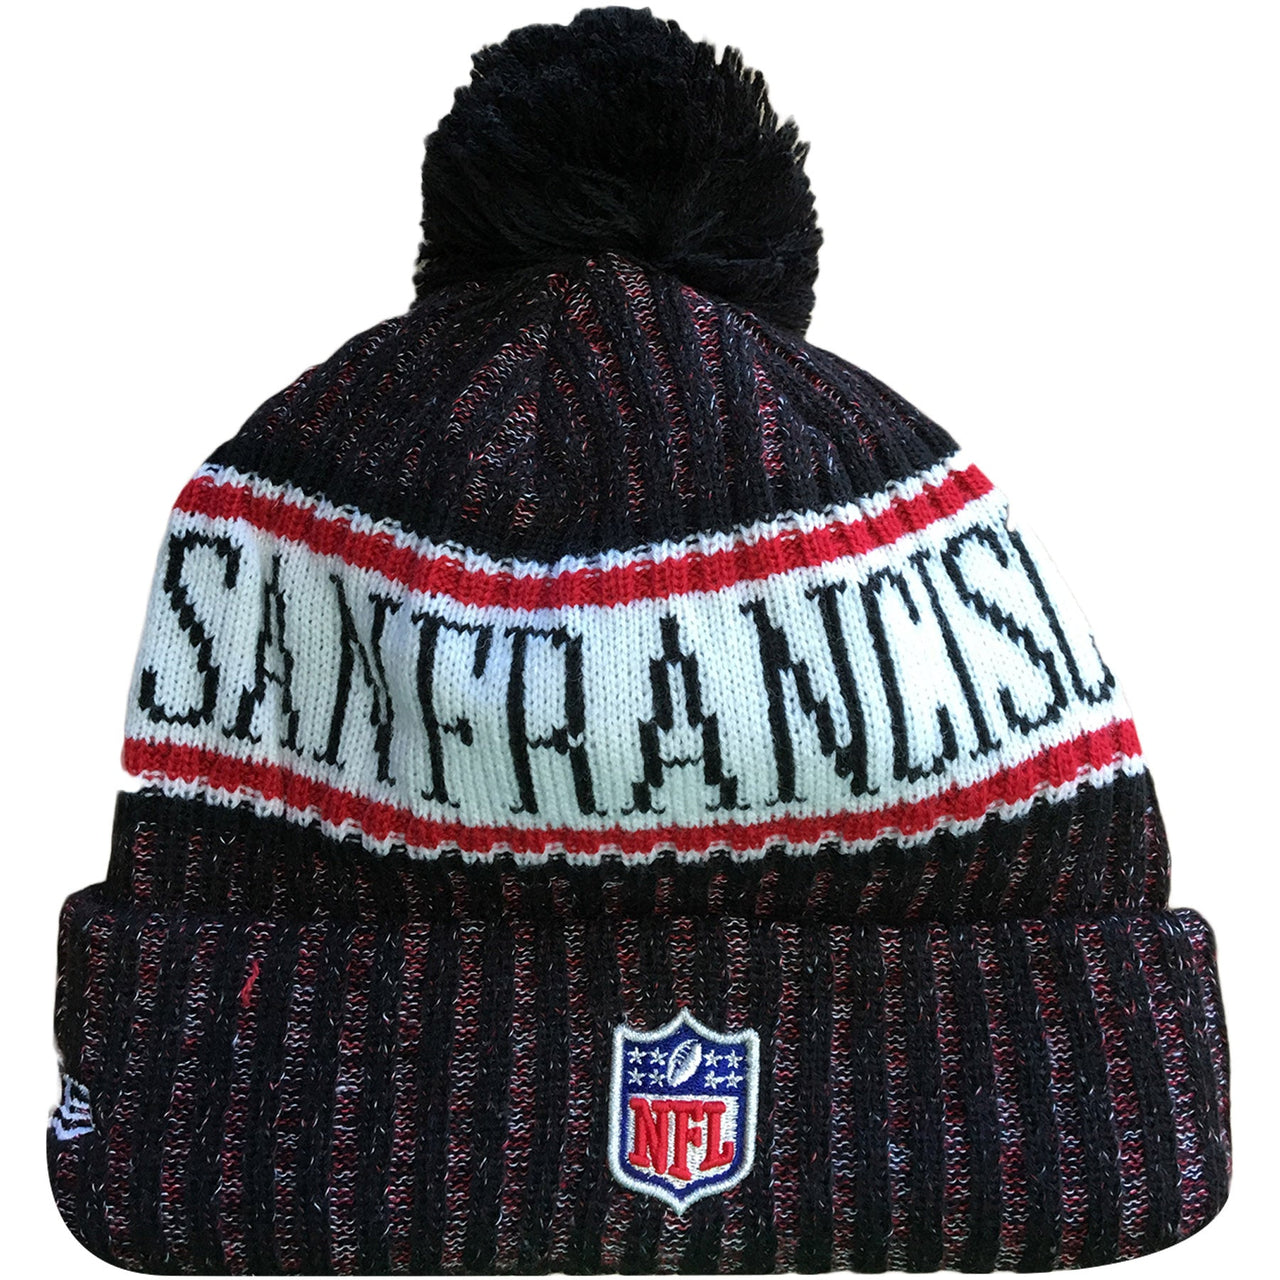 Embroidered on the back of the 2018 San Francisco 49ers On Field Sideline Cold Weather Beanie is the NFL Shield embroidered in white, red, and blue